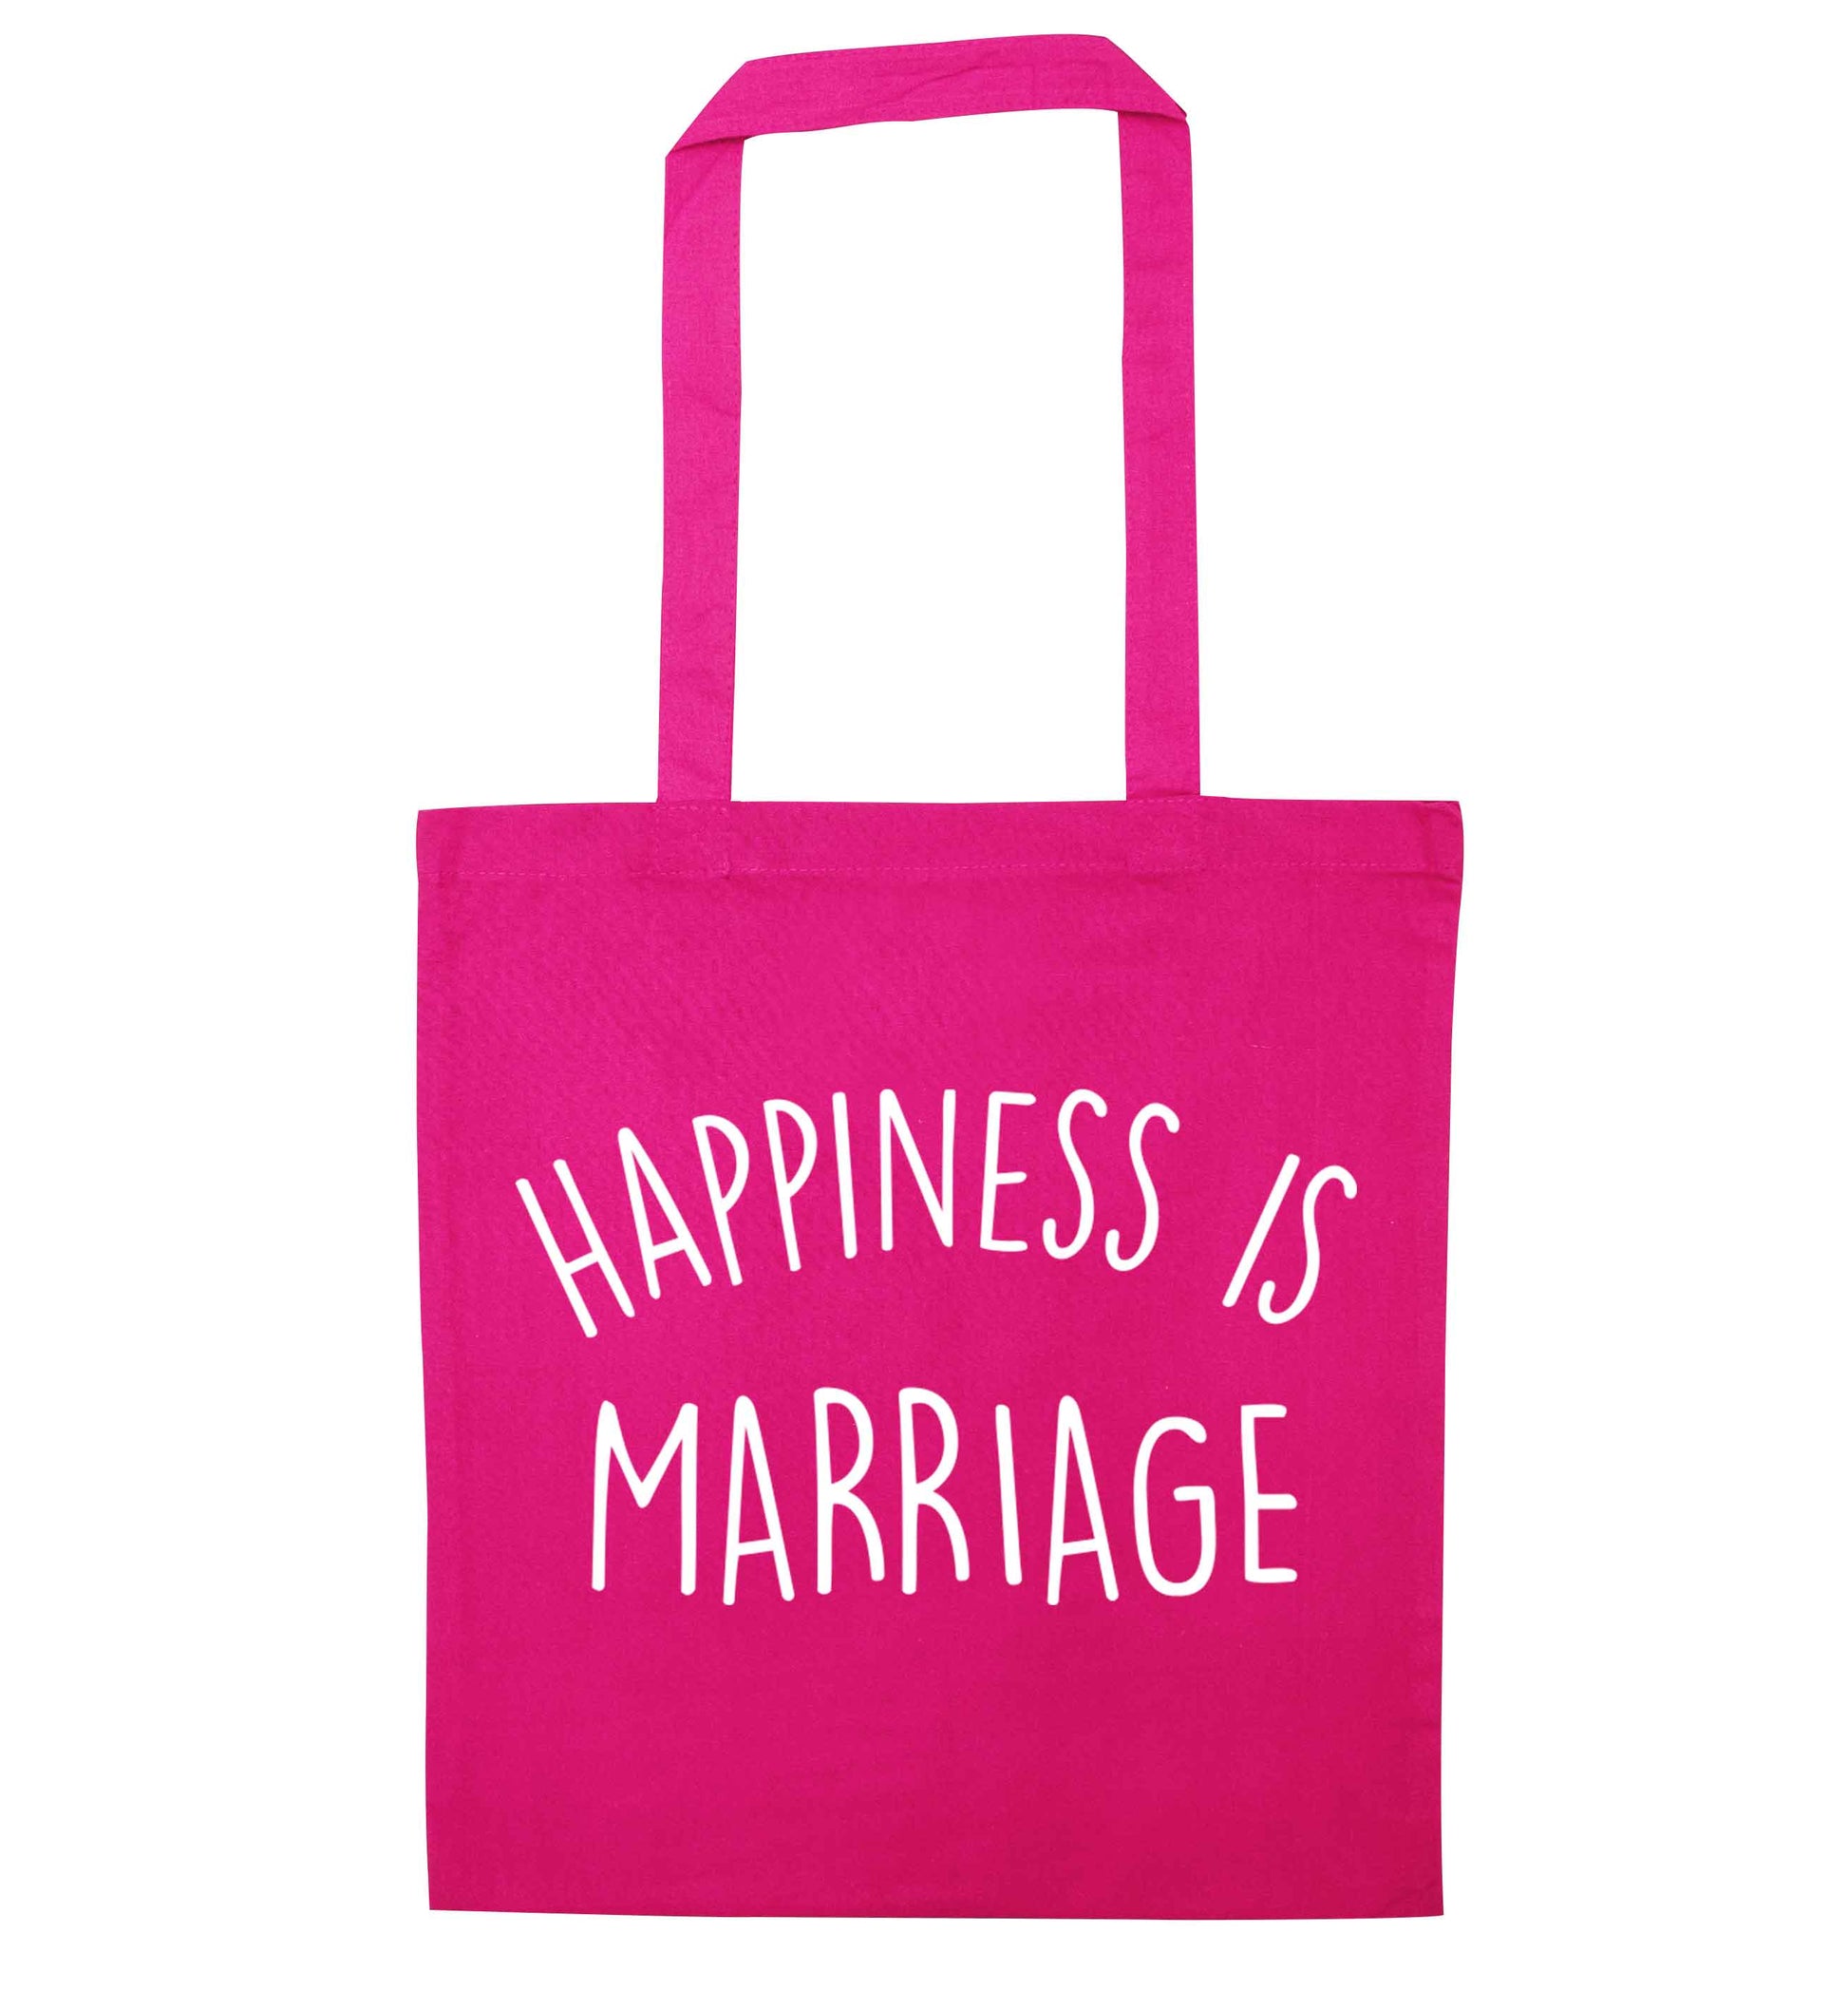 Happiness is wedding planning pink tote bag